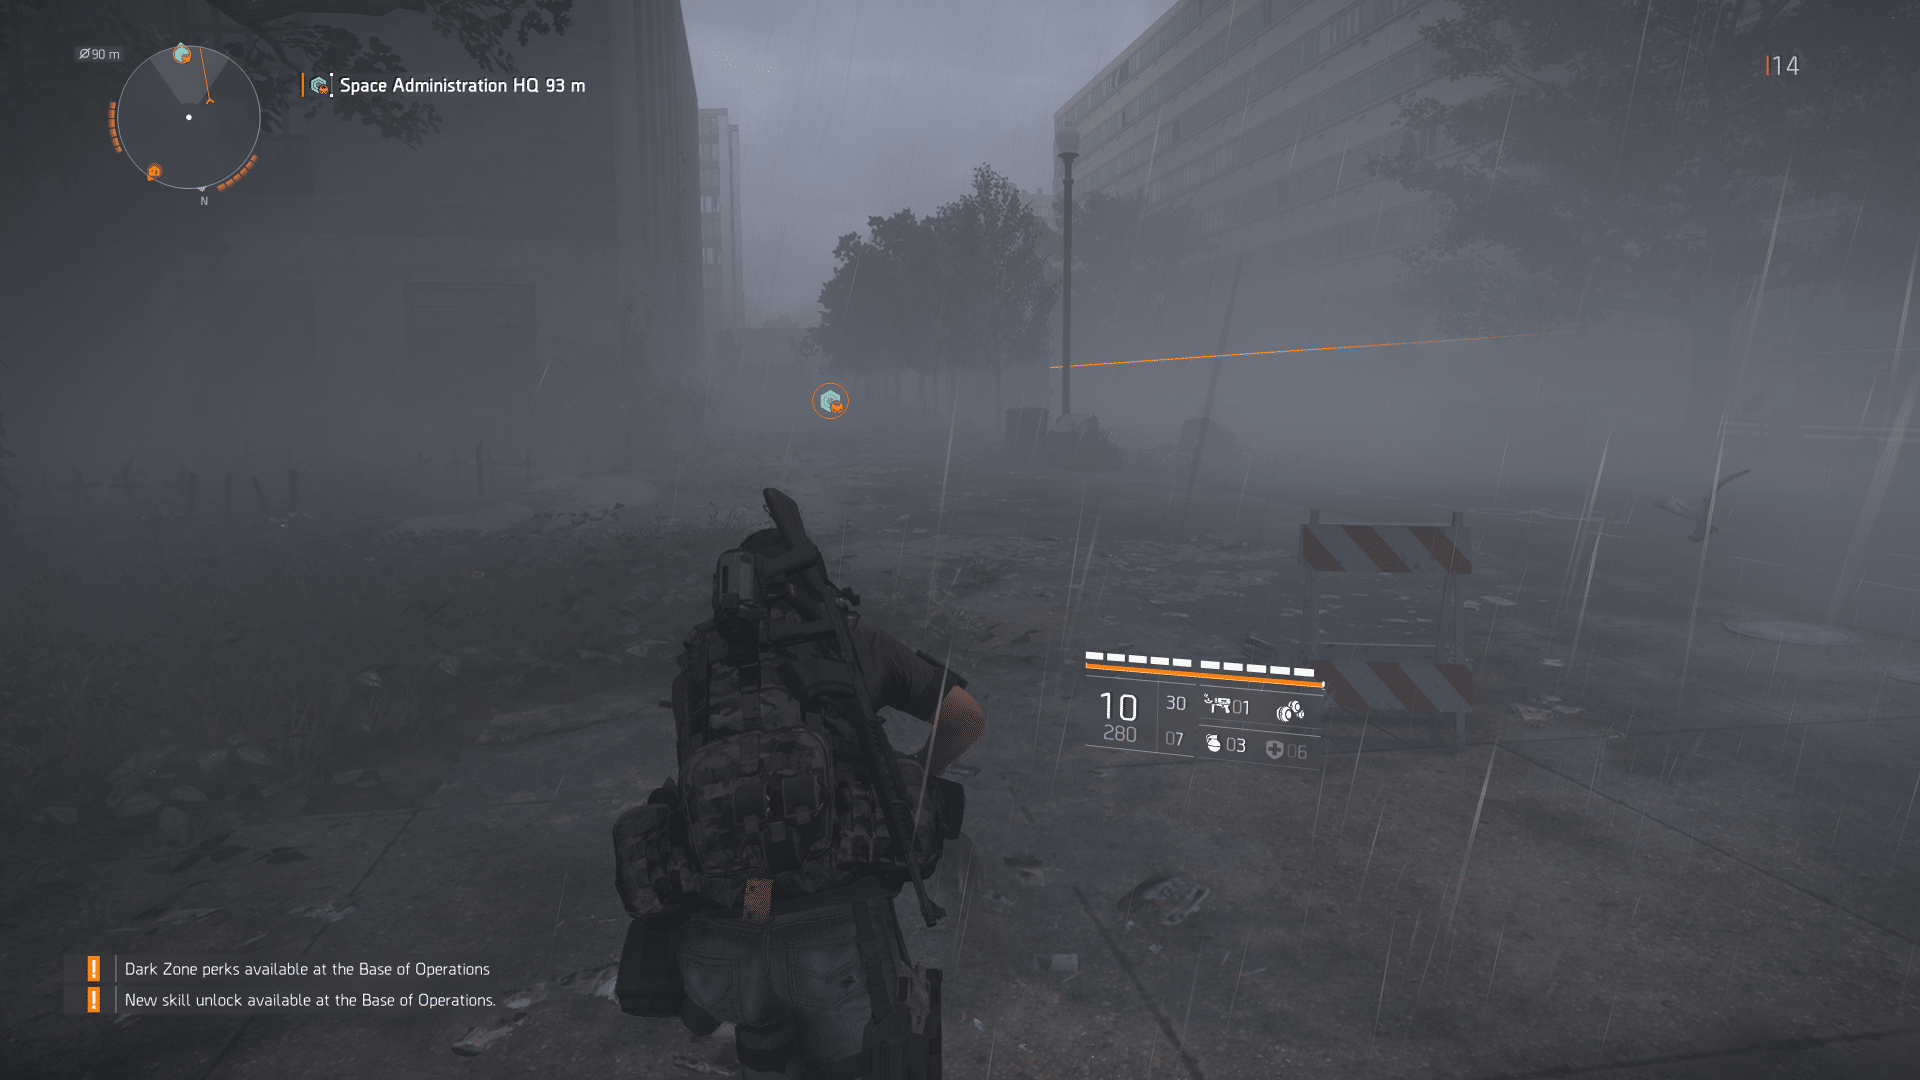 TheDivision2 4 1 2019 8 53 43 PM 968